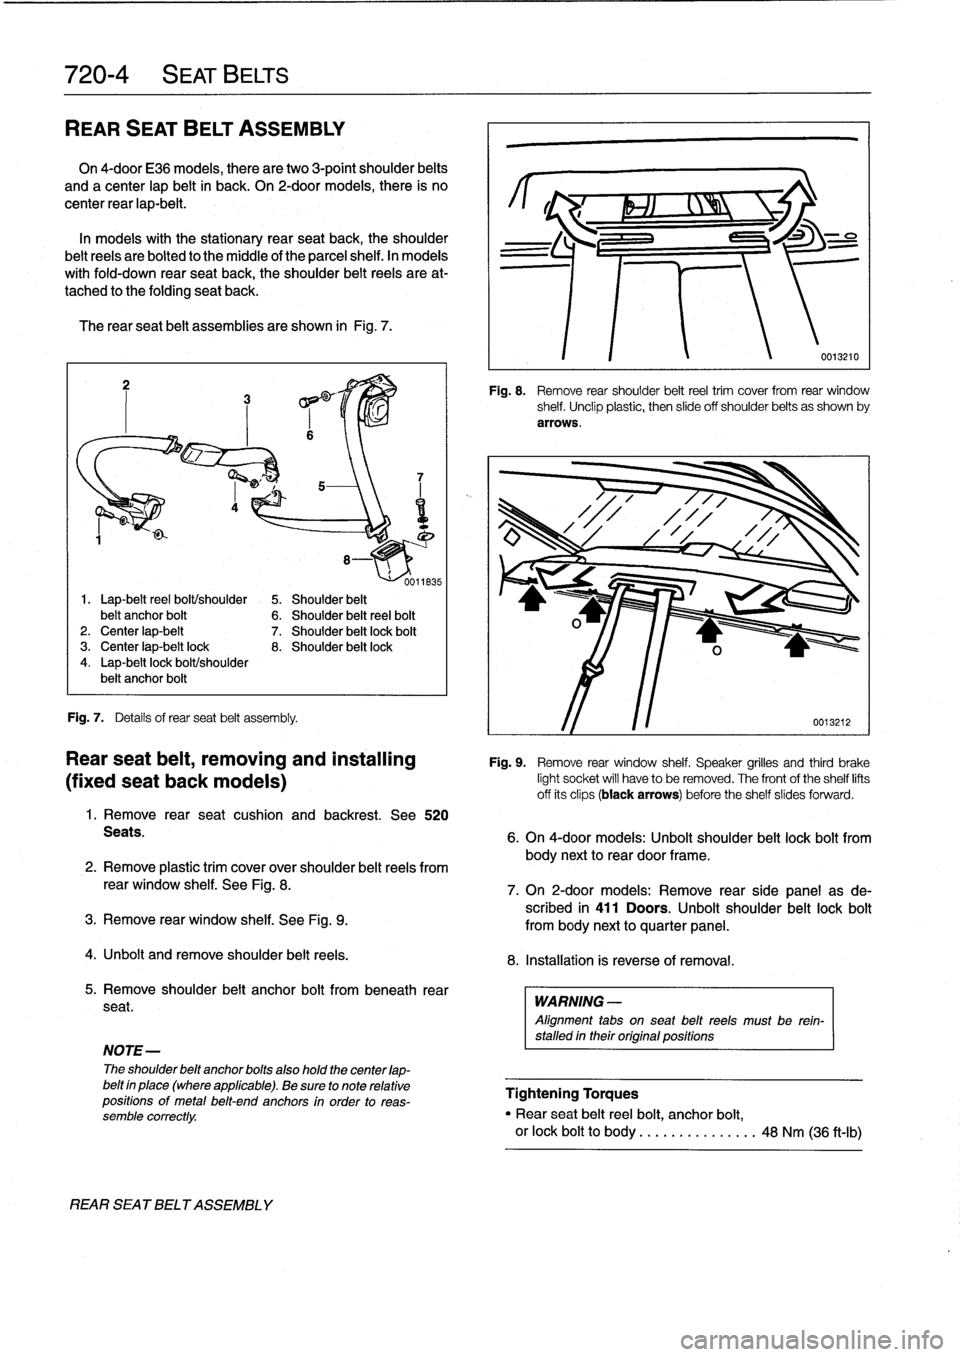 BMW 328i 1994 E36 User Guide 
720-
4

	

SEAT
BELTS

REAR
SEAT
BELT
ASSEMBLY

On
4-door
E36
models,
there
are
two
3-point
shoulder
belts

and
a
center
lap
beltin
back
.
On
2-doormodels,
there
is
no

center
rear
lap-belt
.

In
mod